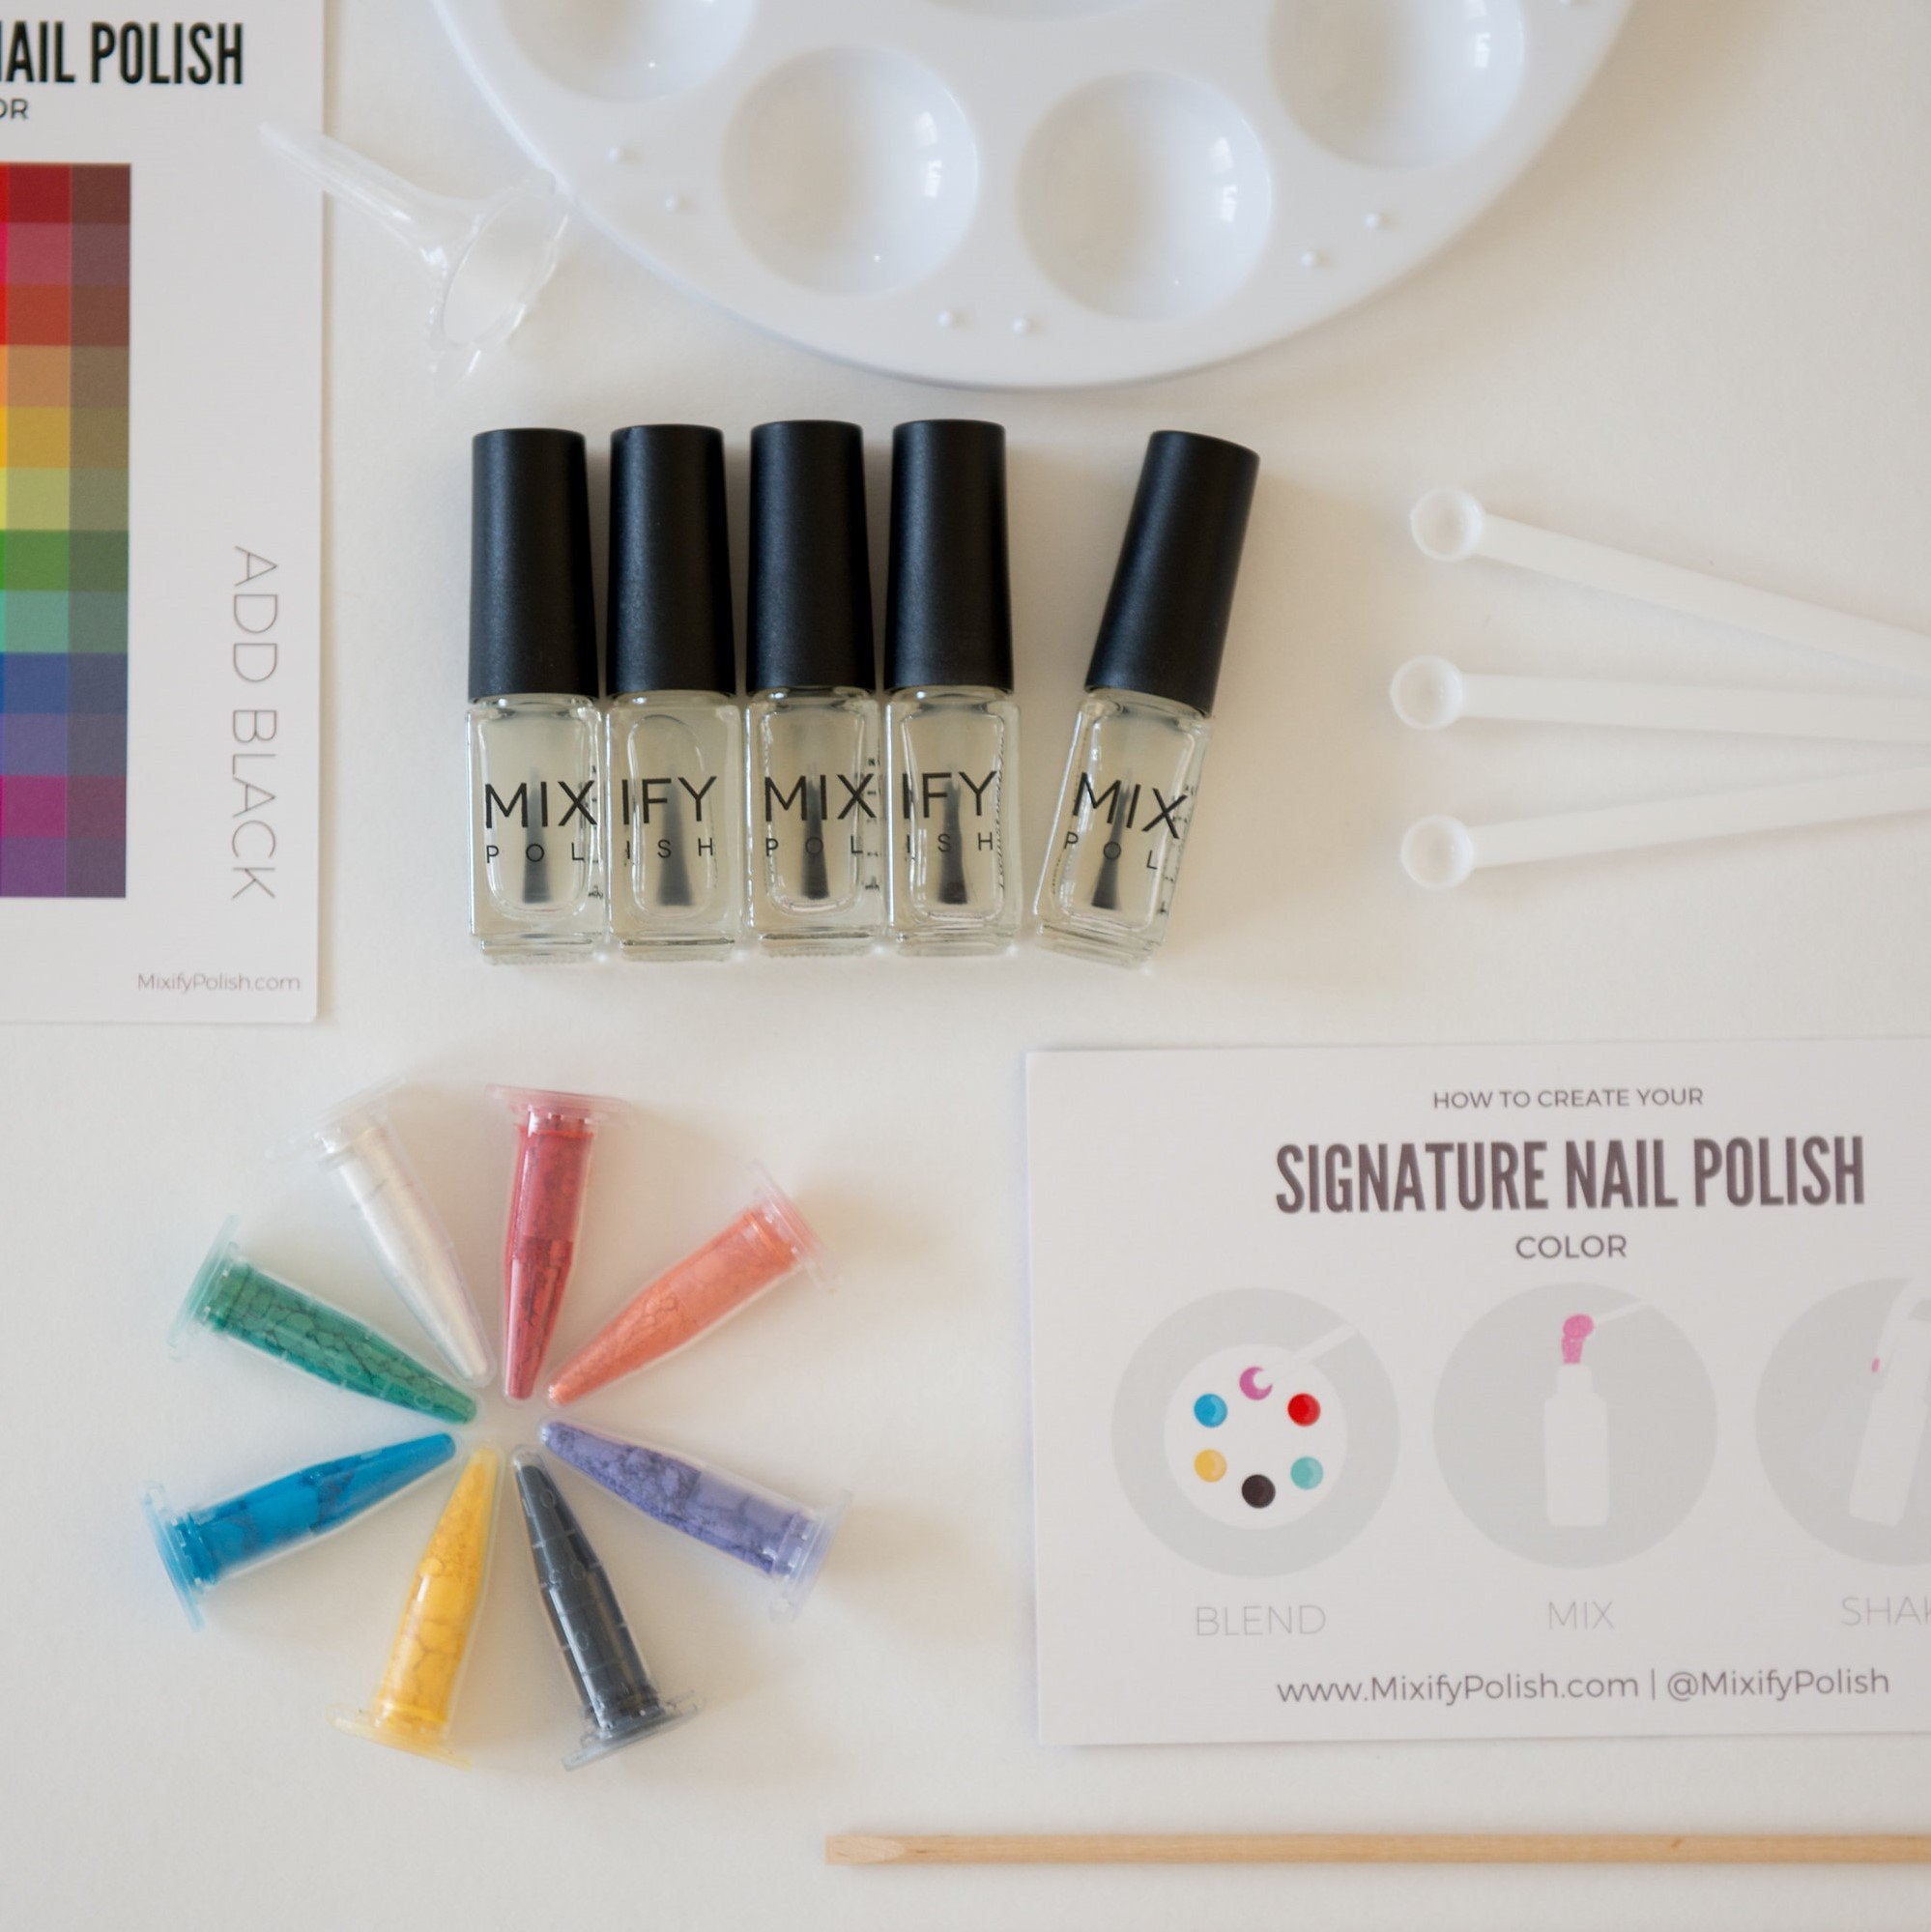 The Make Your Own Nail Polish Kit Limited Edition